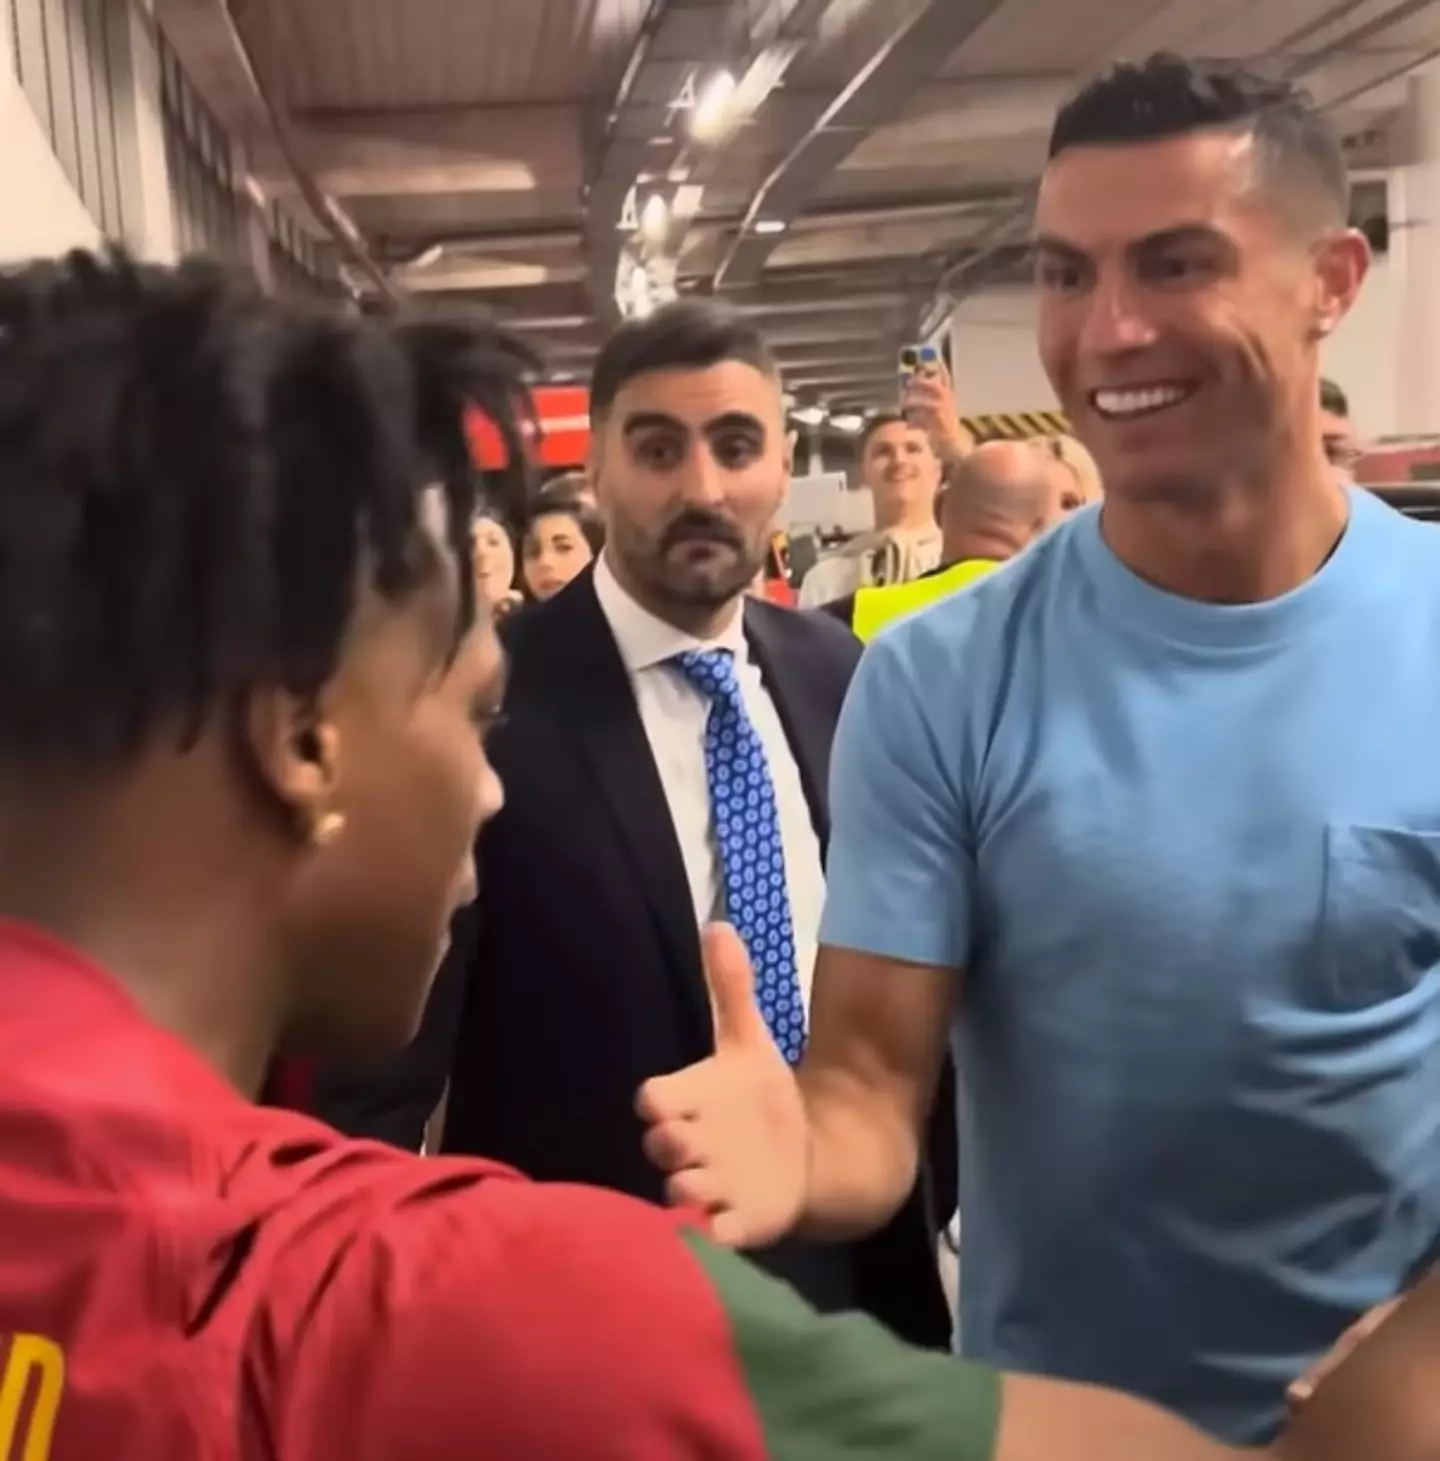 The YouTuber and Ronaldo enjoyed meeting and did the footballer's famous celebration.